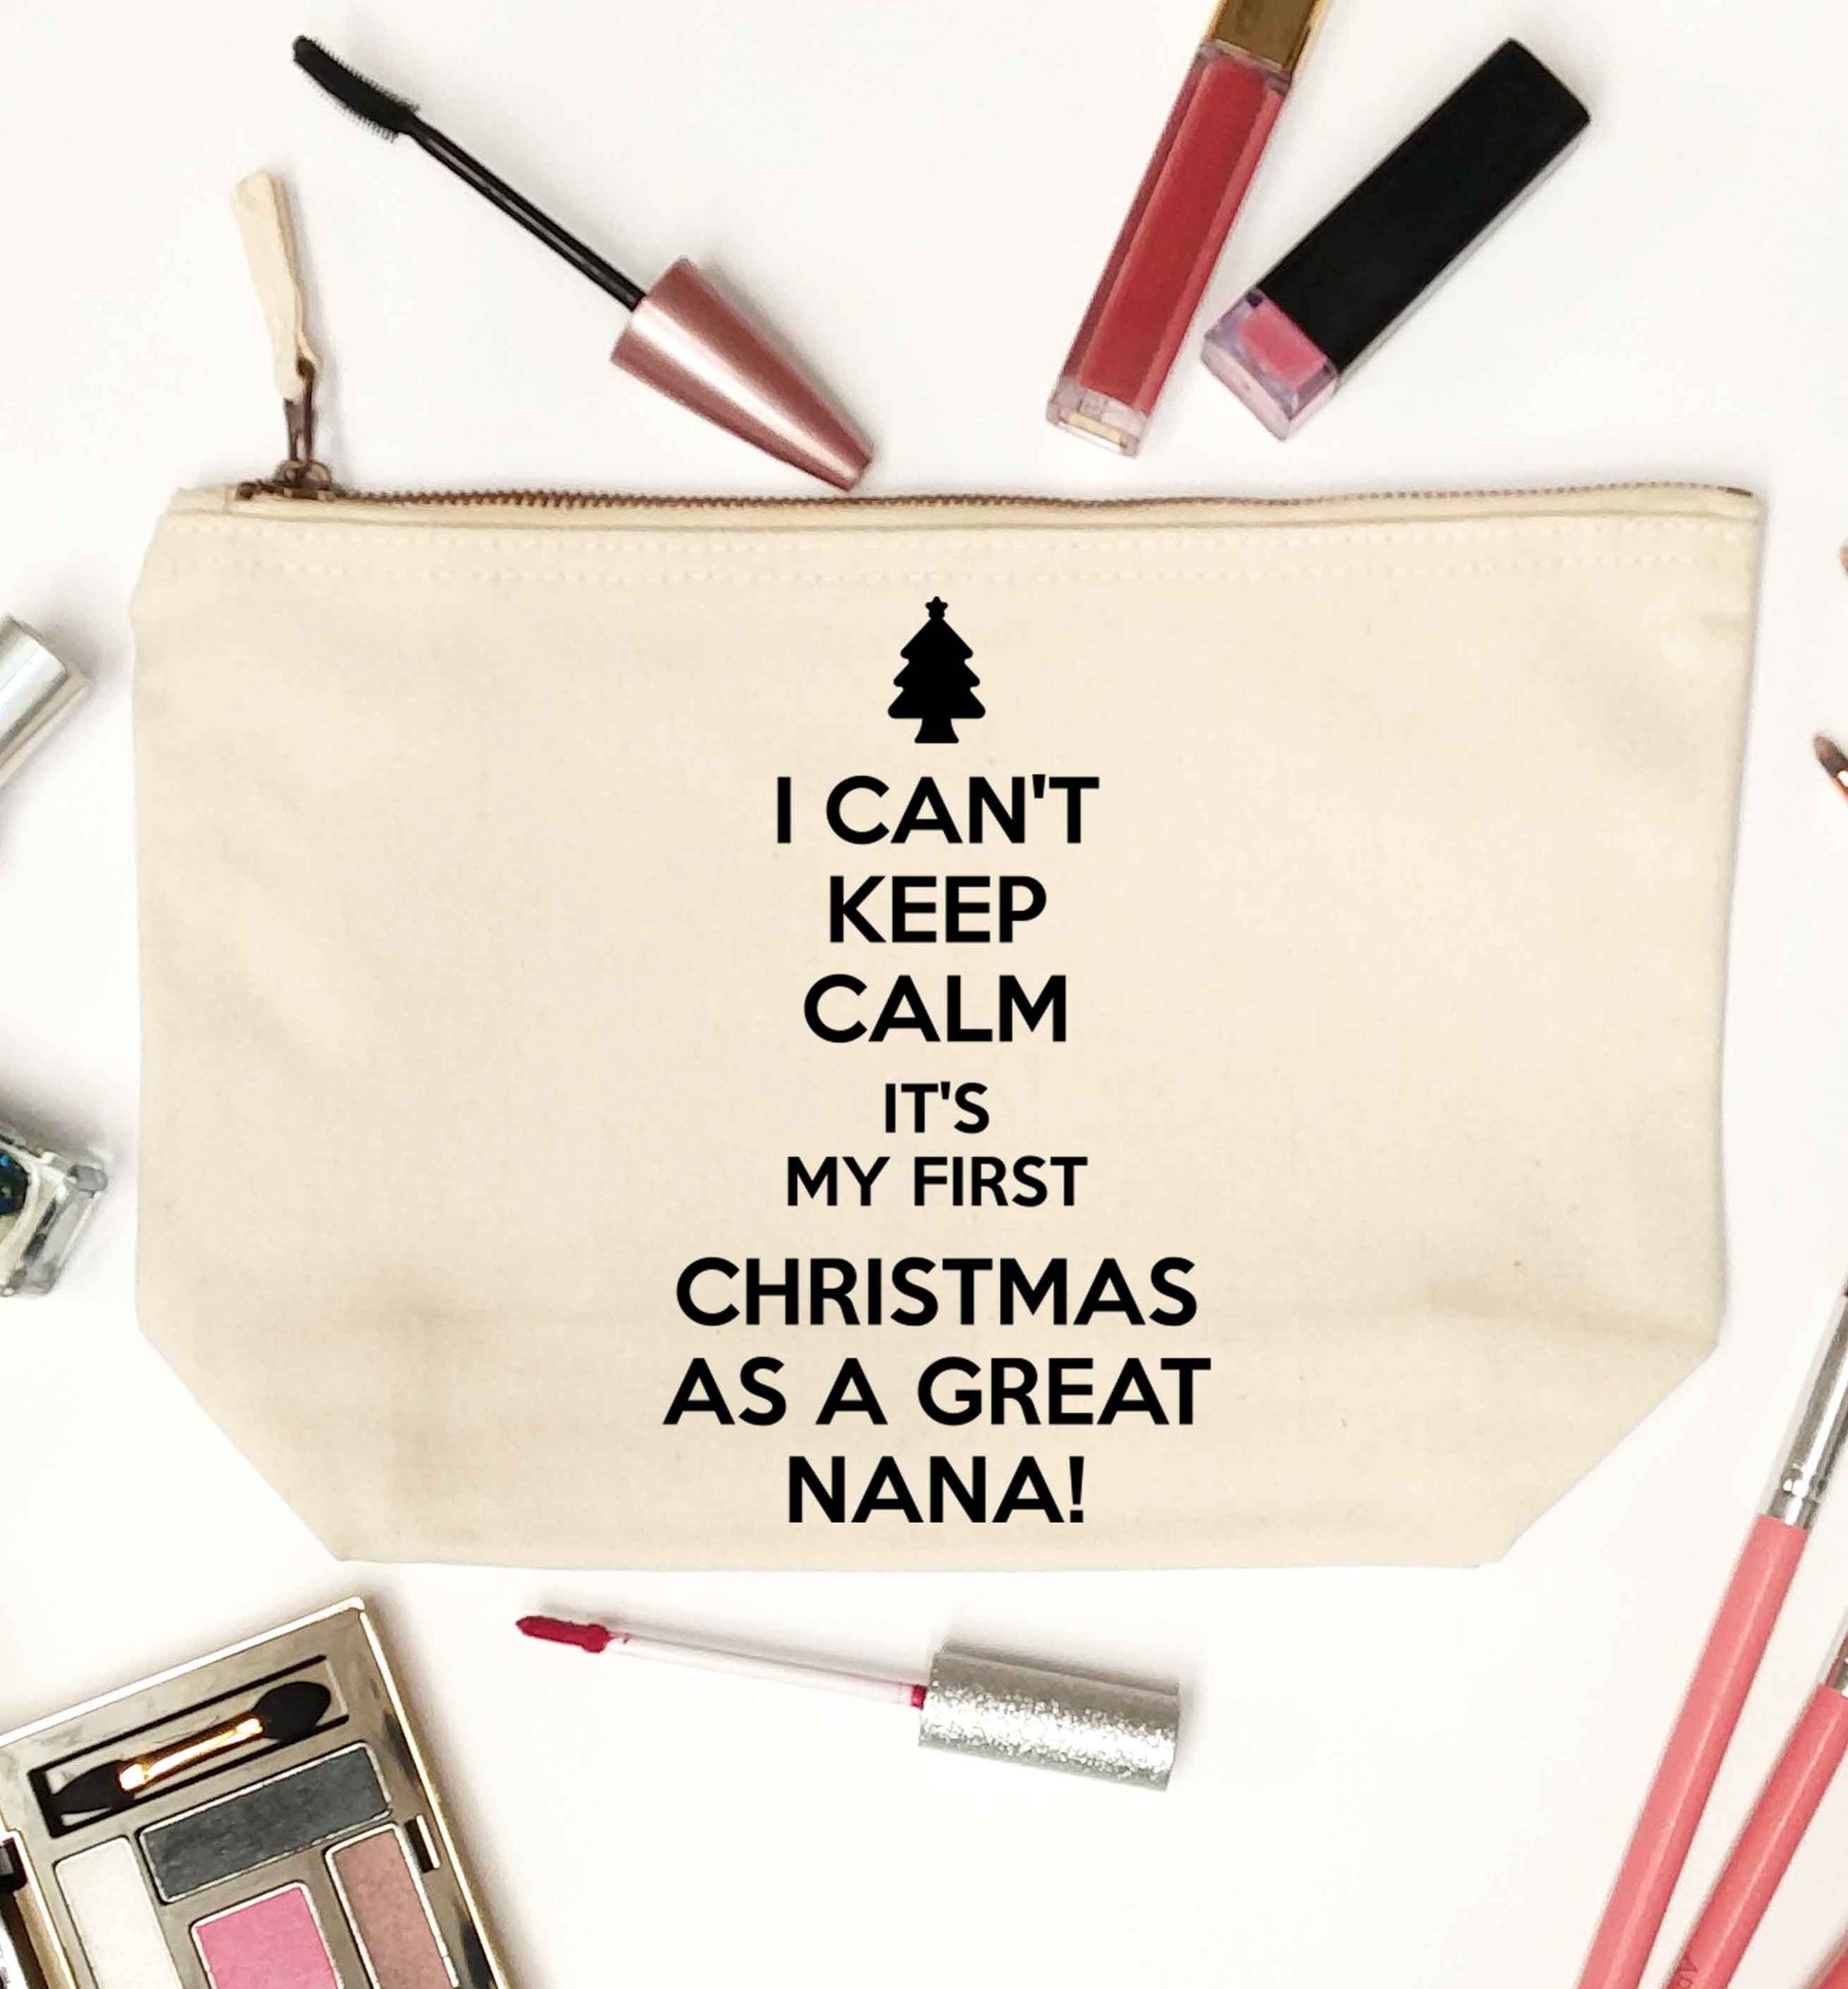 I can't keep calm it's my first Christmas as a great nana! natural makeup bag